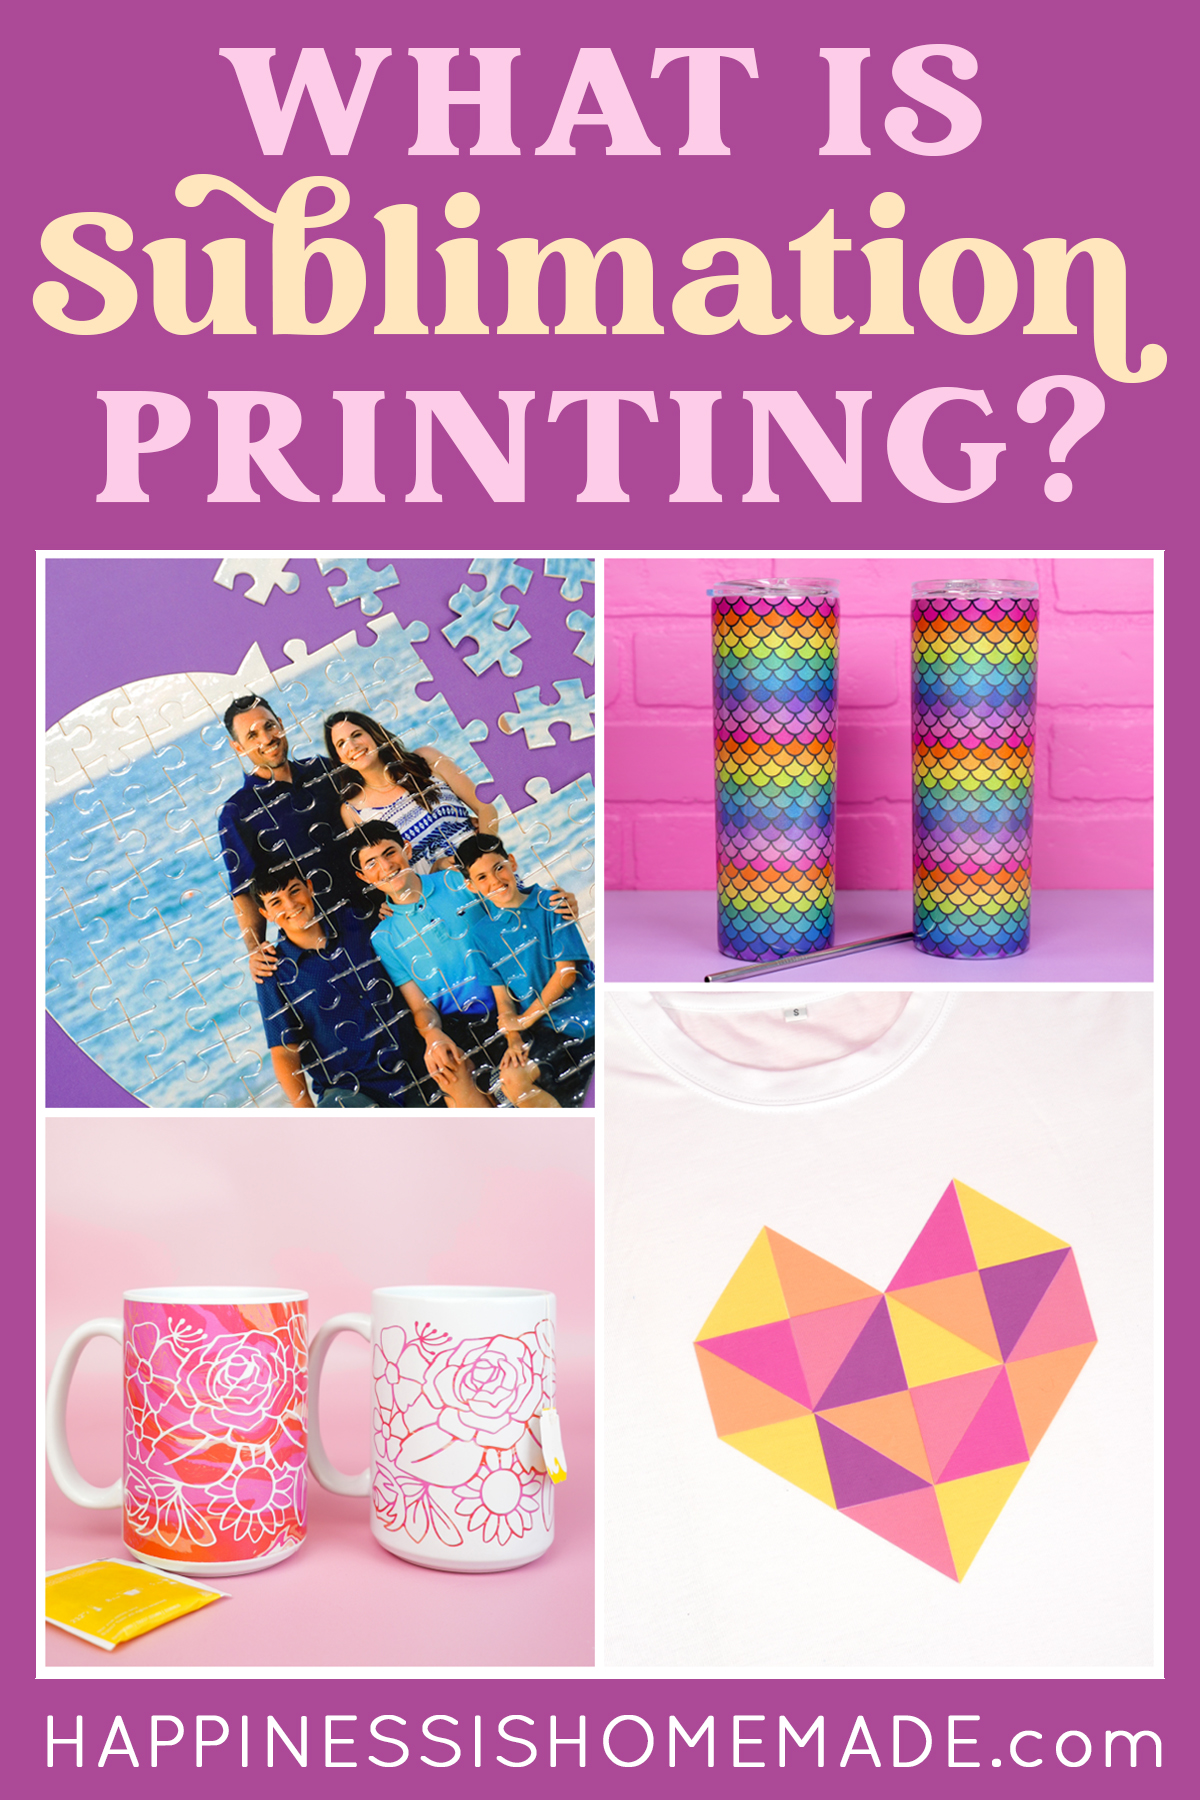 Interested in Learning T-shirt Heat Transfer Printing Technology?    Blog - Tips About DIY Gift Printing Businesses